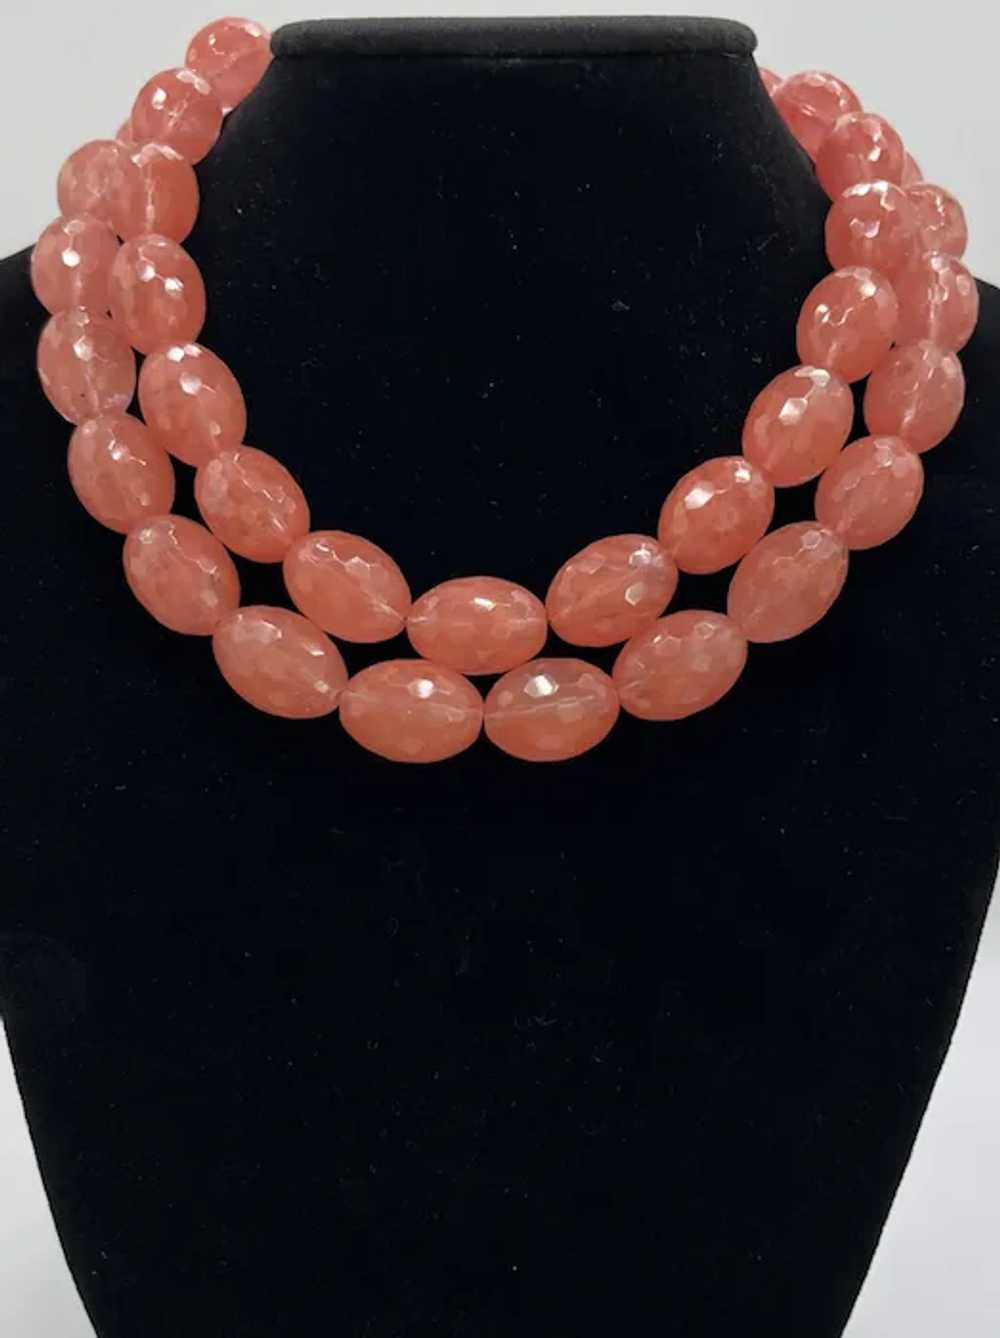 Strawberry quartz faceted double strand necklace - image 2